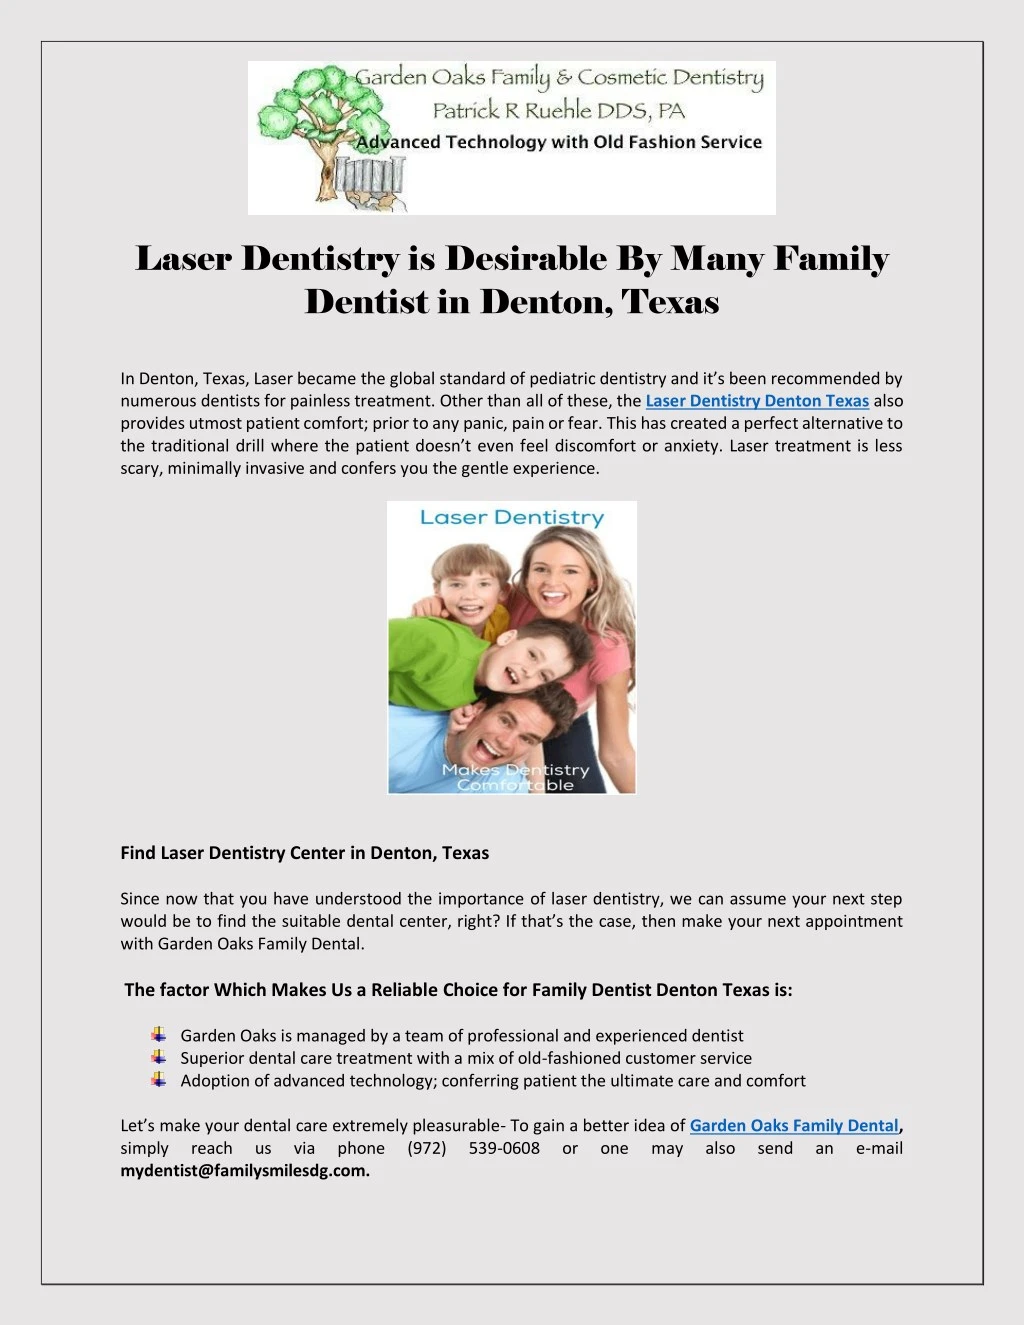 laser dentistry is desirable by many family